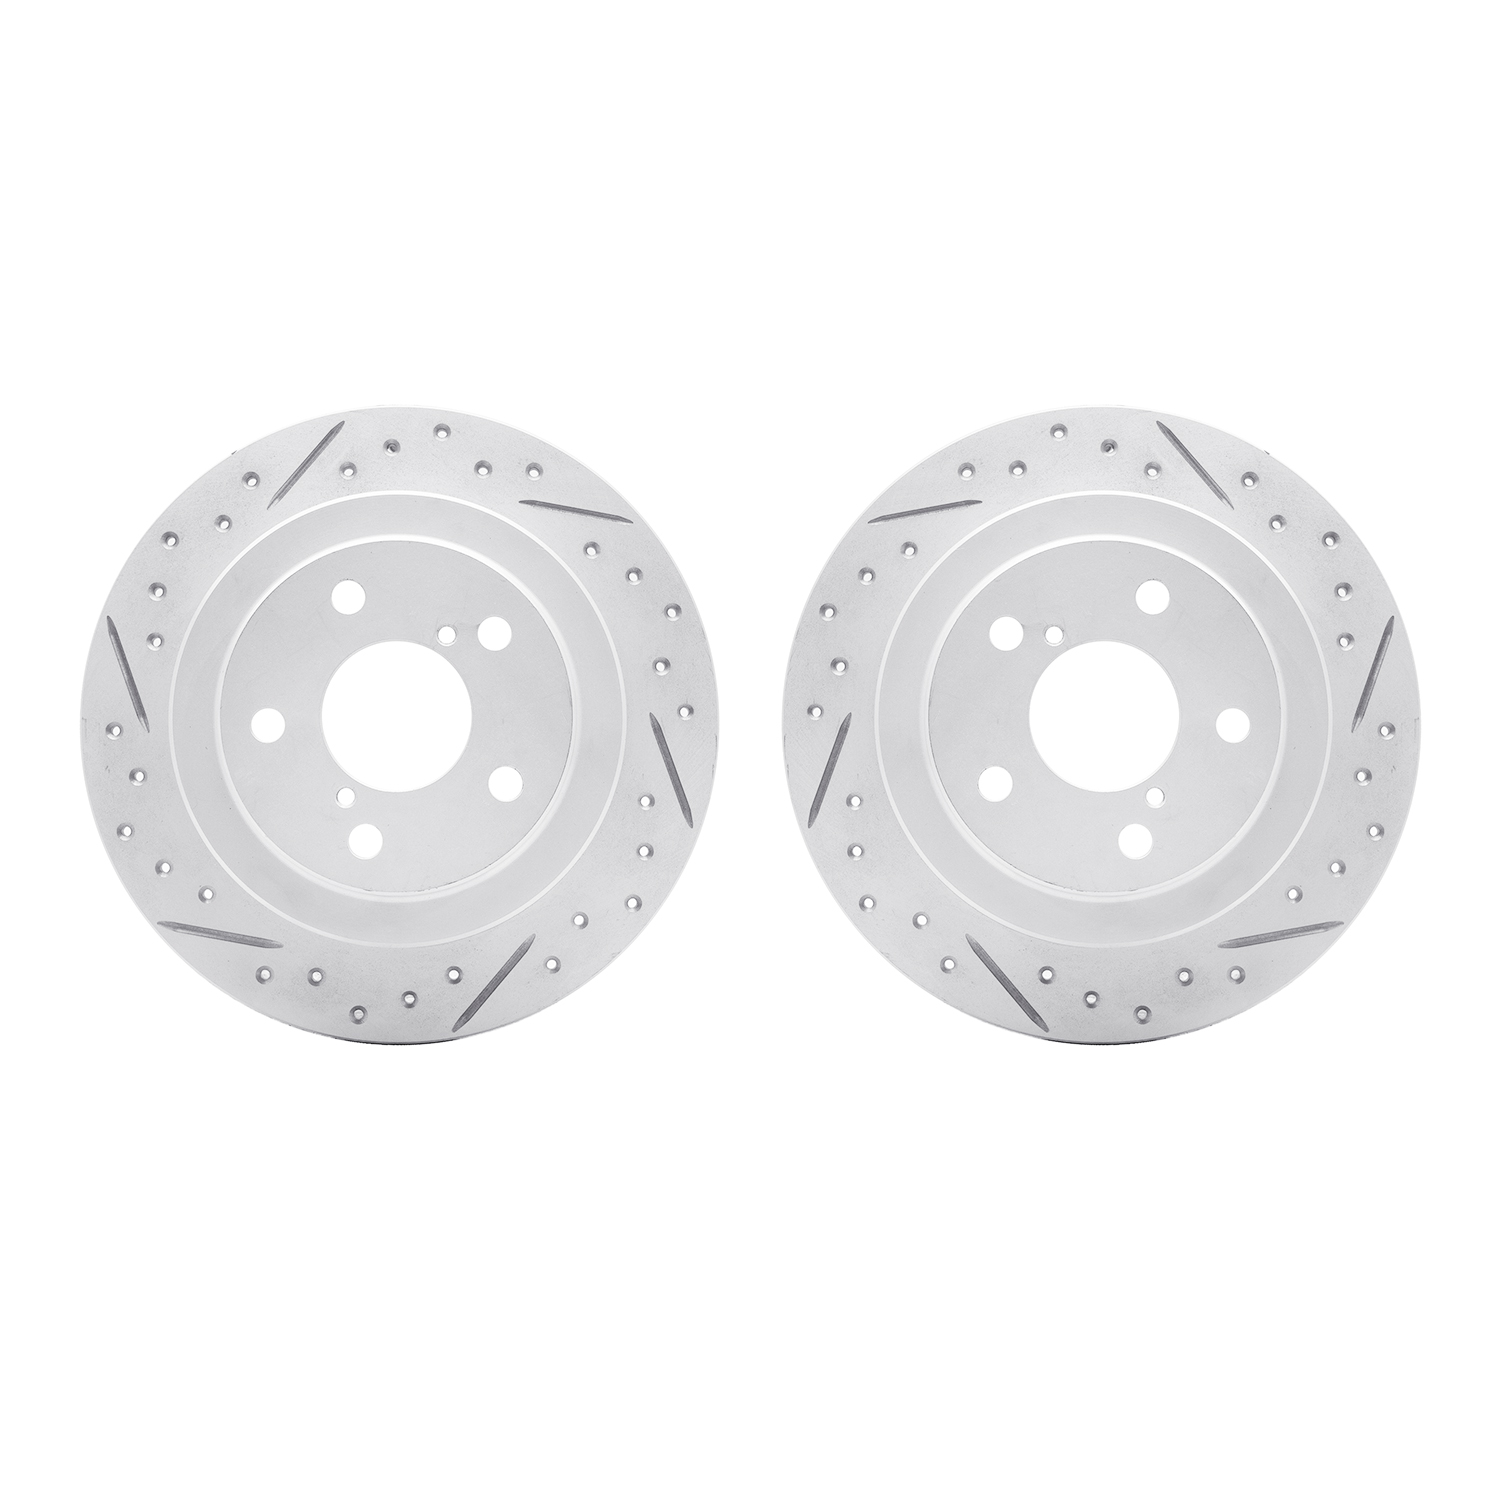 2002-13016 Geoperformance Drilled/Slotted Brake Rotors, 1990-2008 GM, Position: Rear